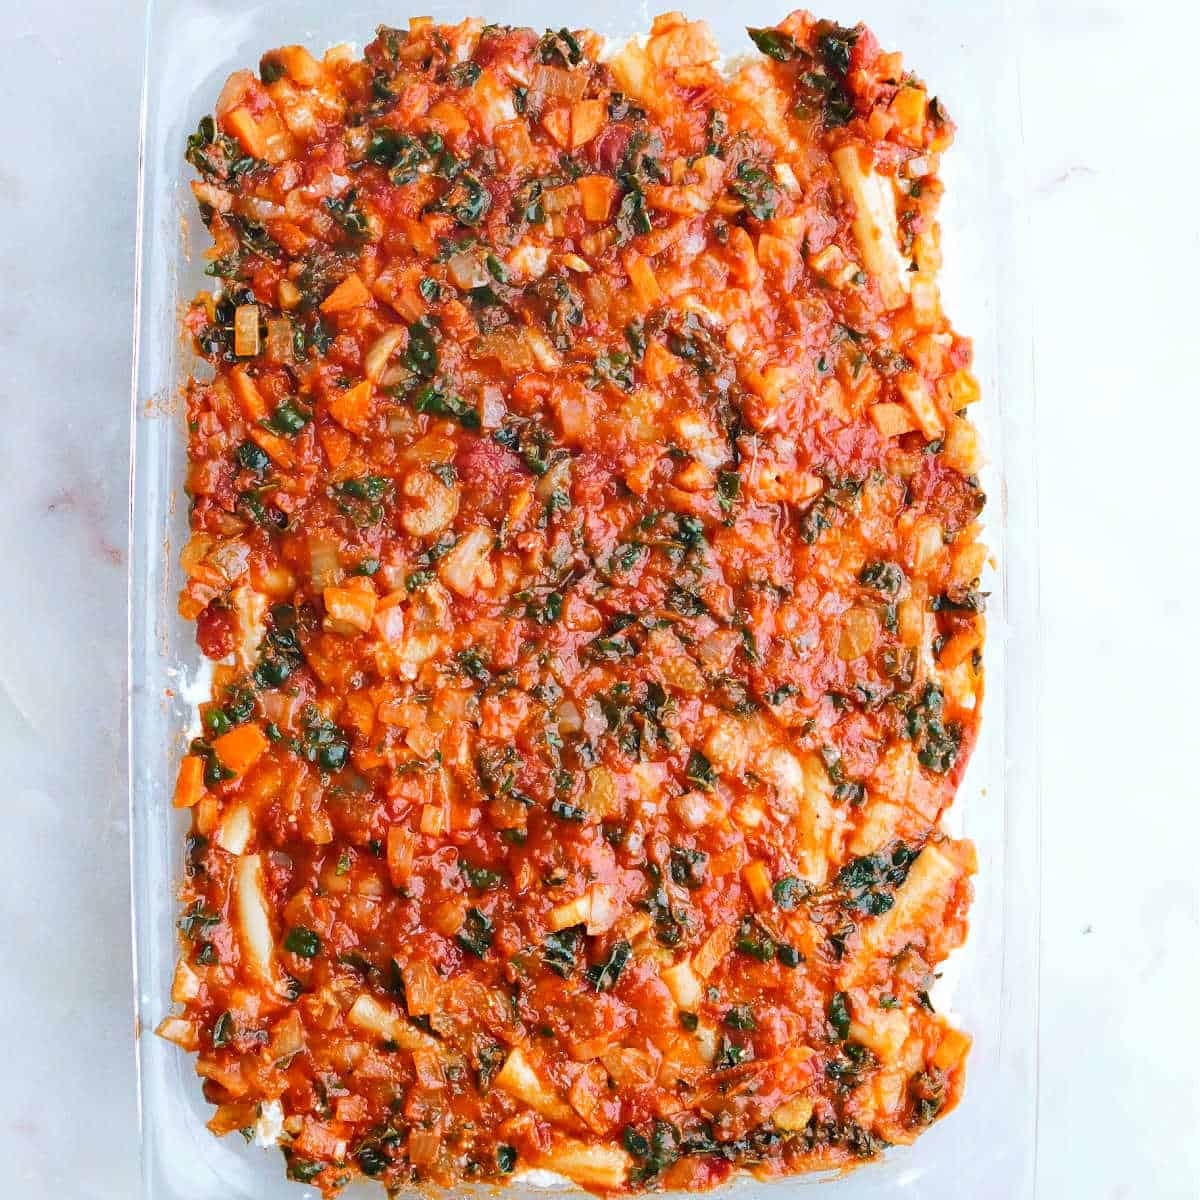 vegetable tomato sauce covering the ziti and cheese mixture in a dish